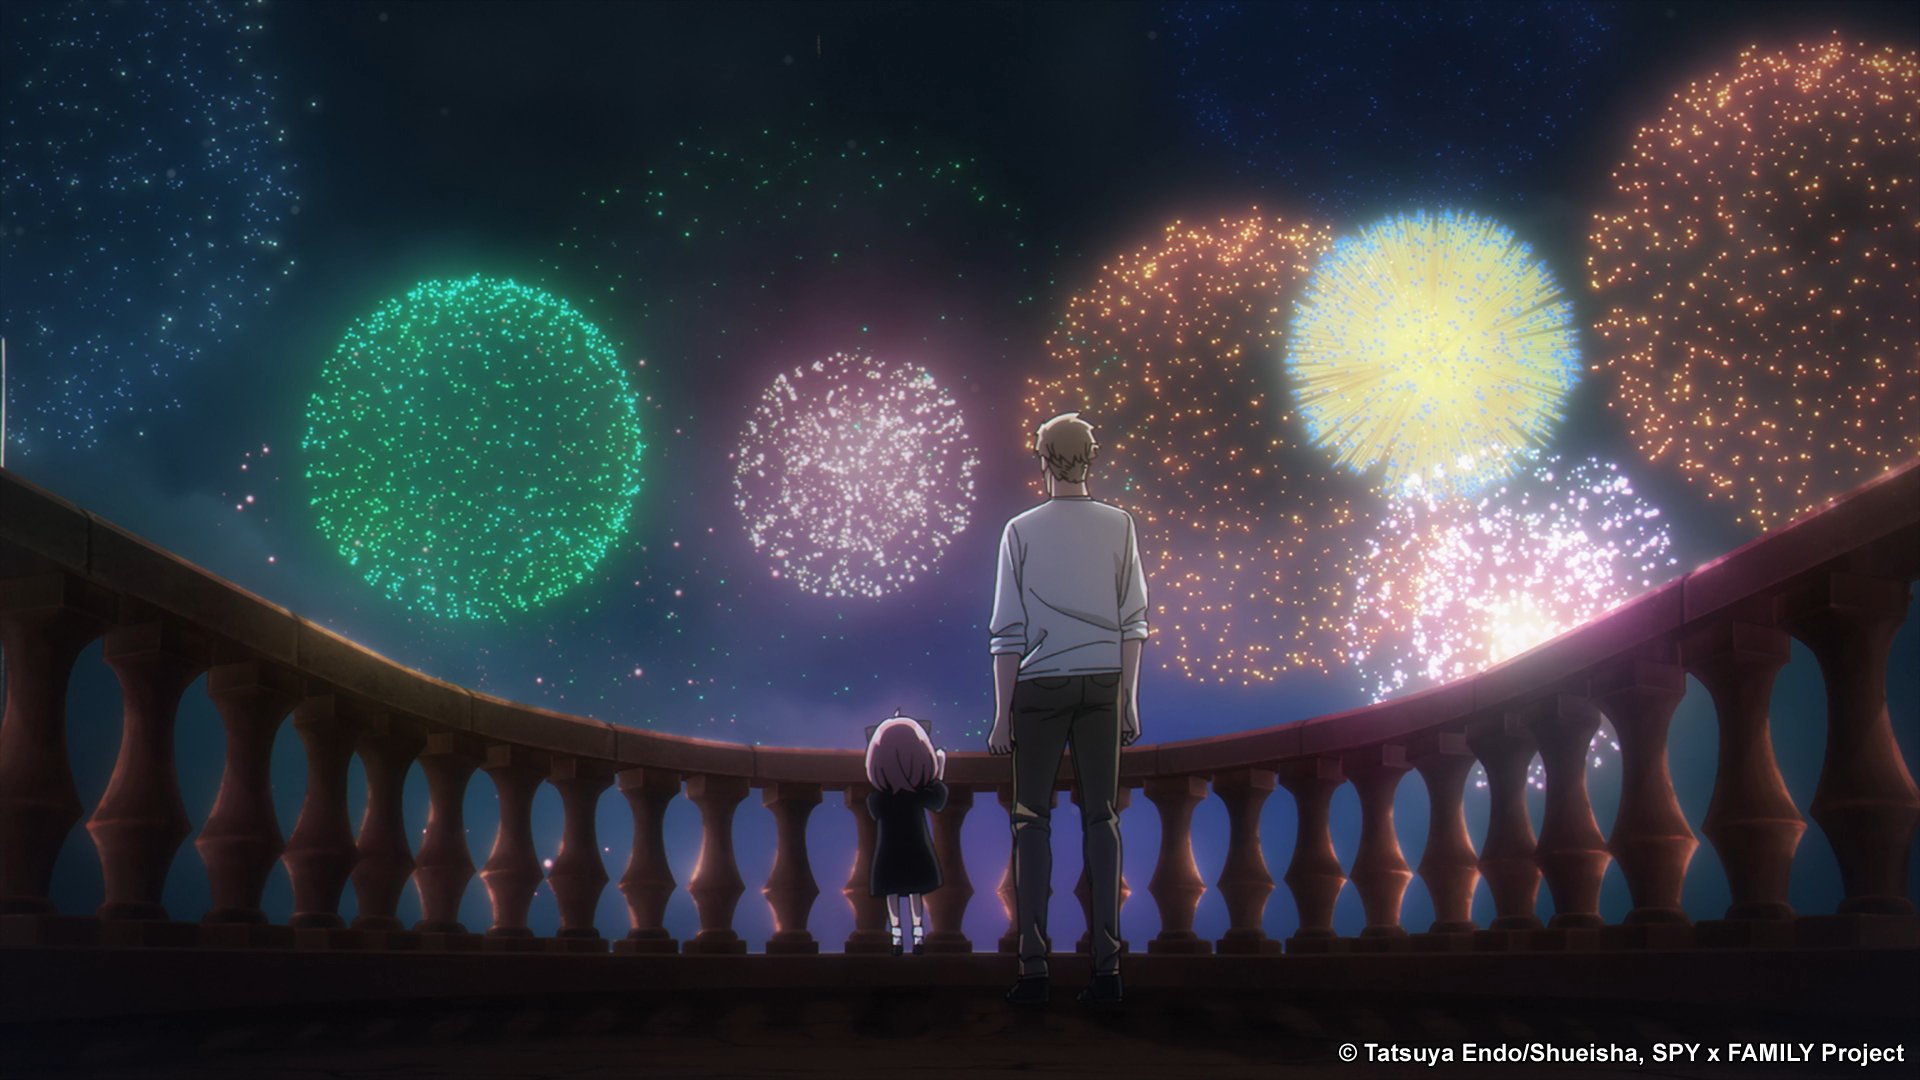 A still from 'Spy x Family' for our list of best anime to watch during summer 2022. It shows Loid and Anya Forger standing next to one another on a balcony and looking out at fireworks.